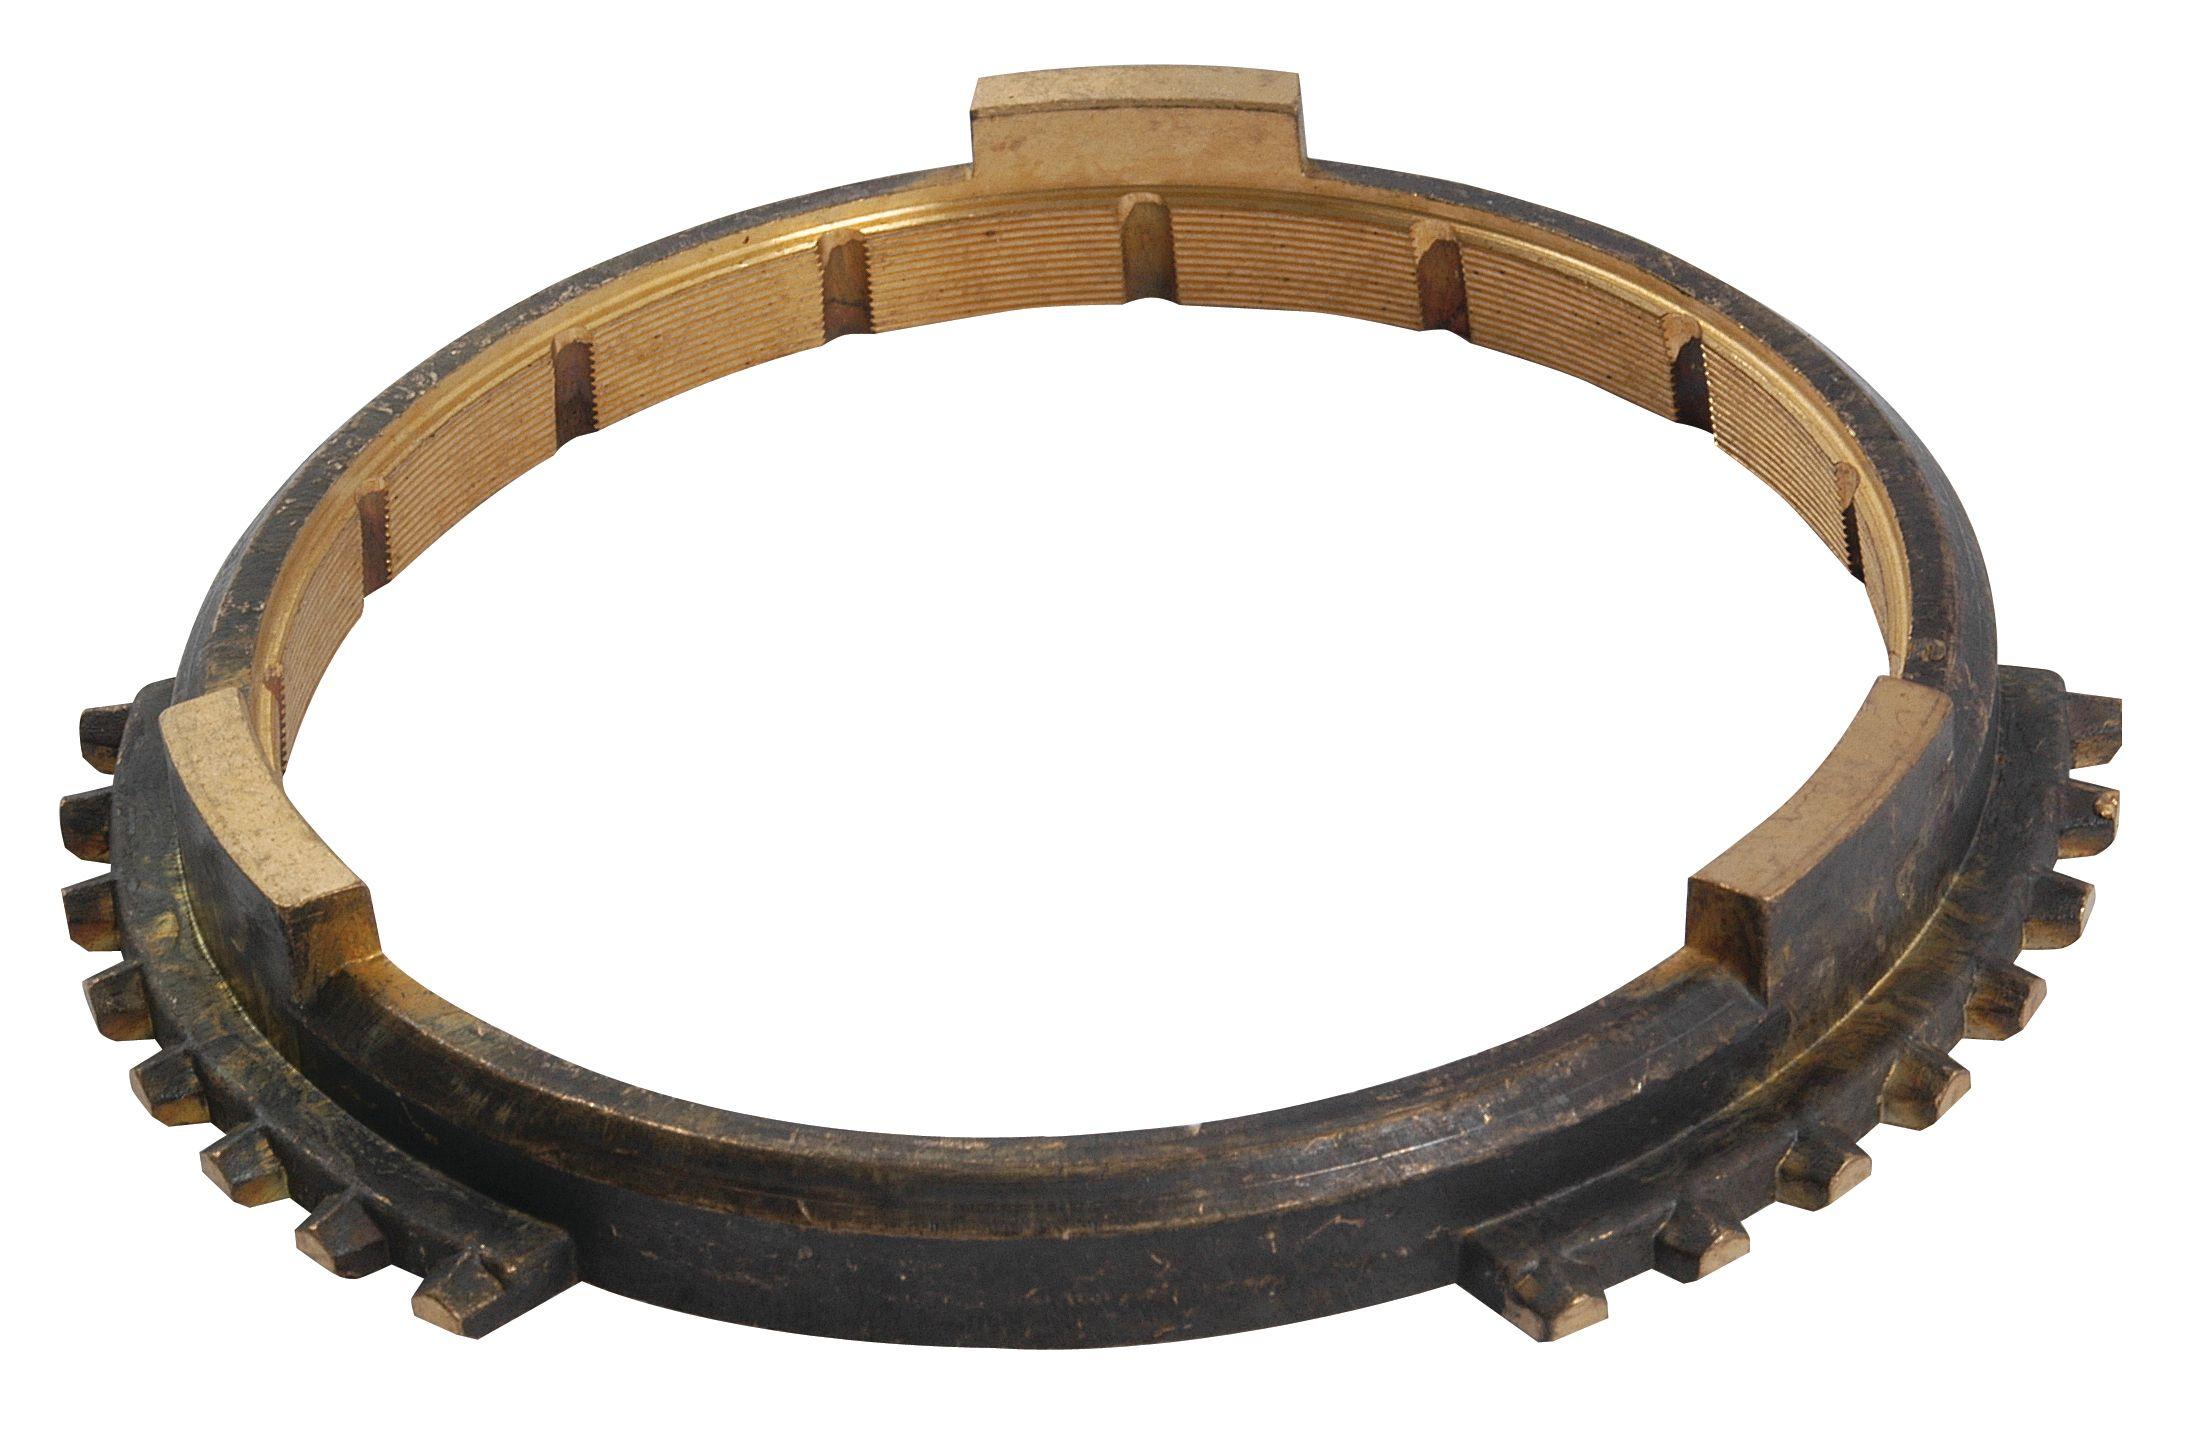 ALLIS CHALMERS SYNCRO RING 62558